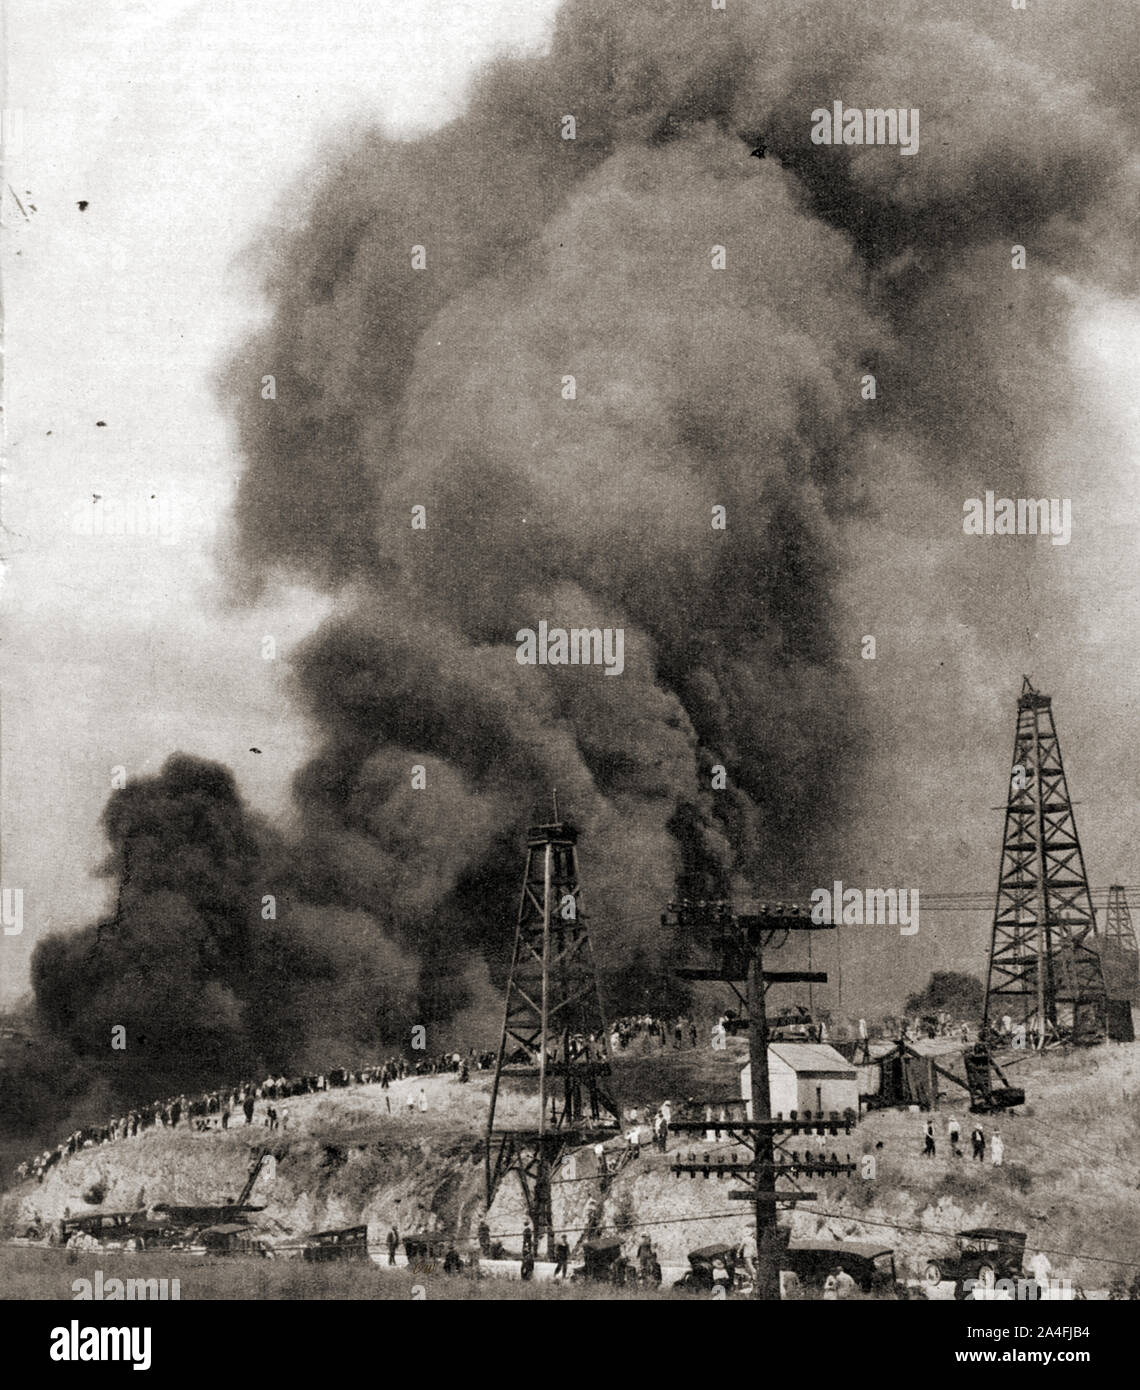 A photograph of a large fire that took place at  a Los Angeles oil rig fire in the 1930's .By 1930, California was producing nearly  a quarter of the world's oil , and the towns population had grown to 1.2 million Stock Photo